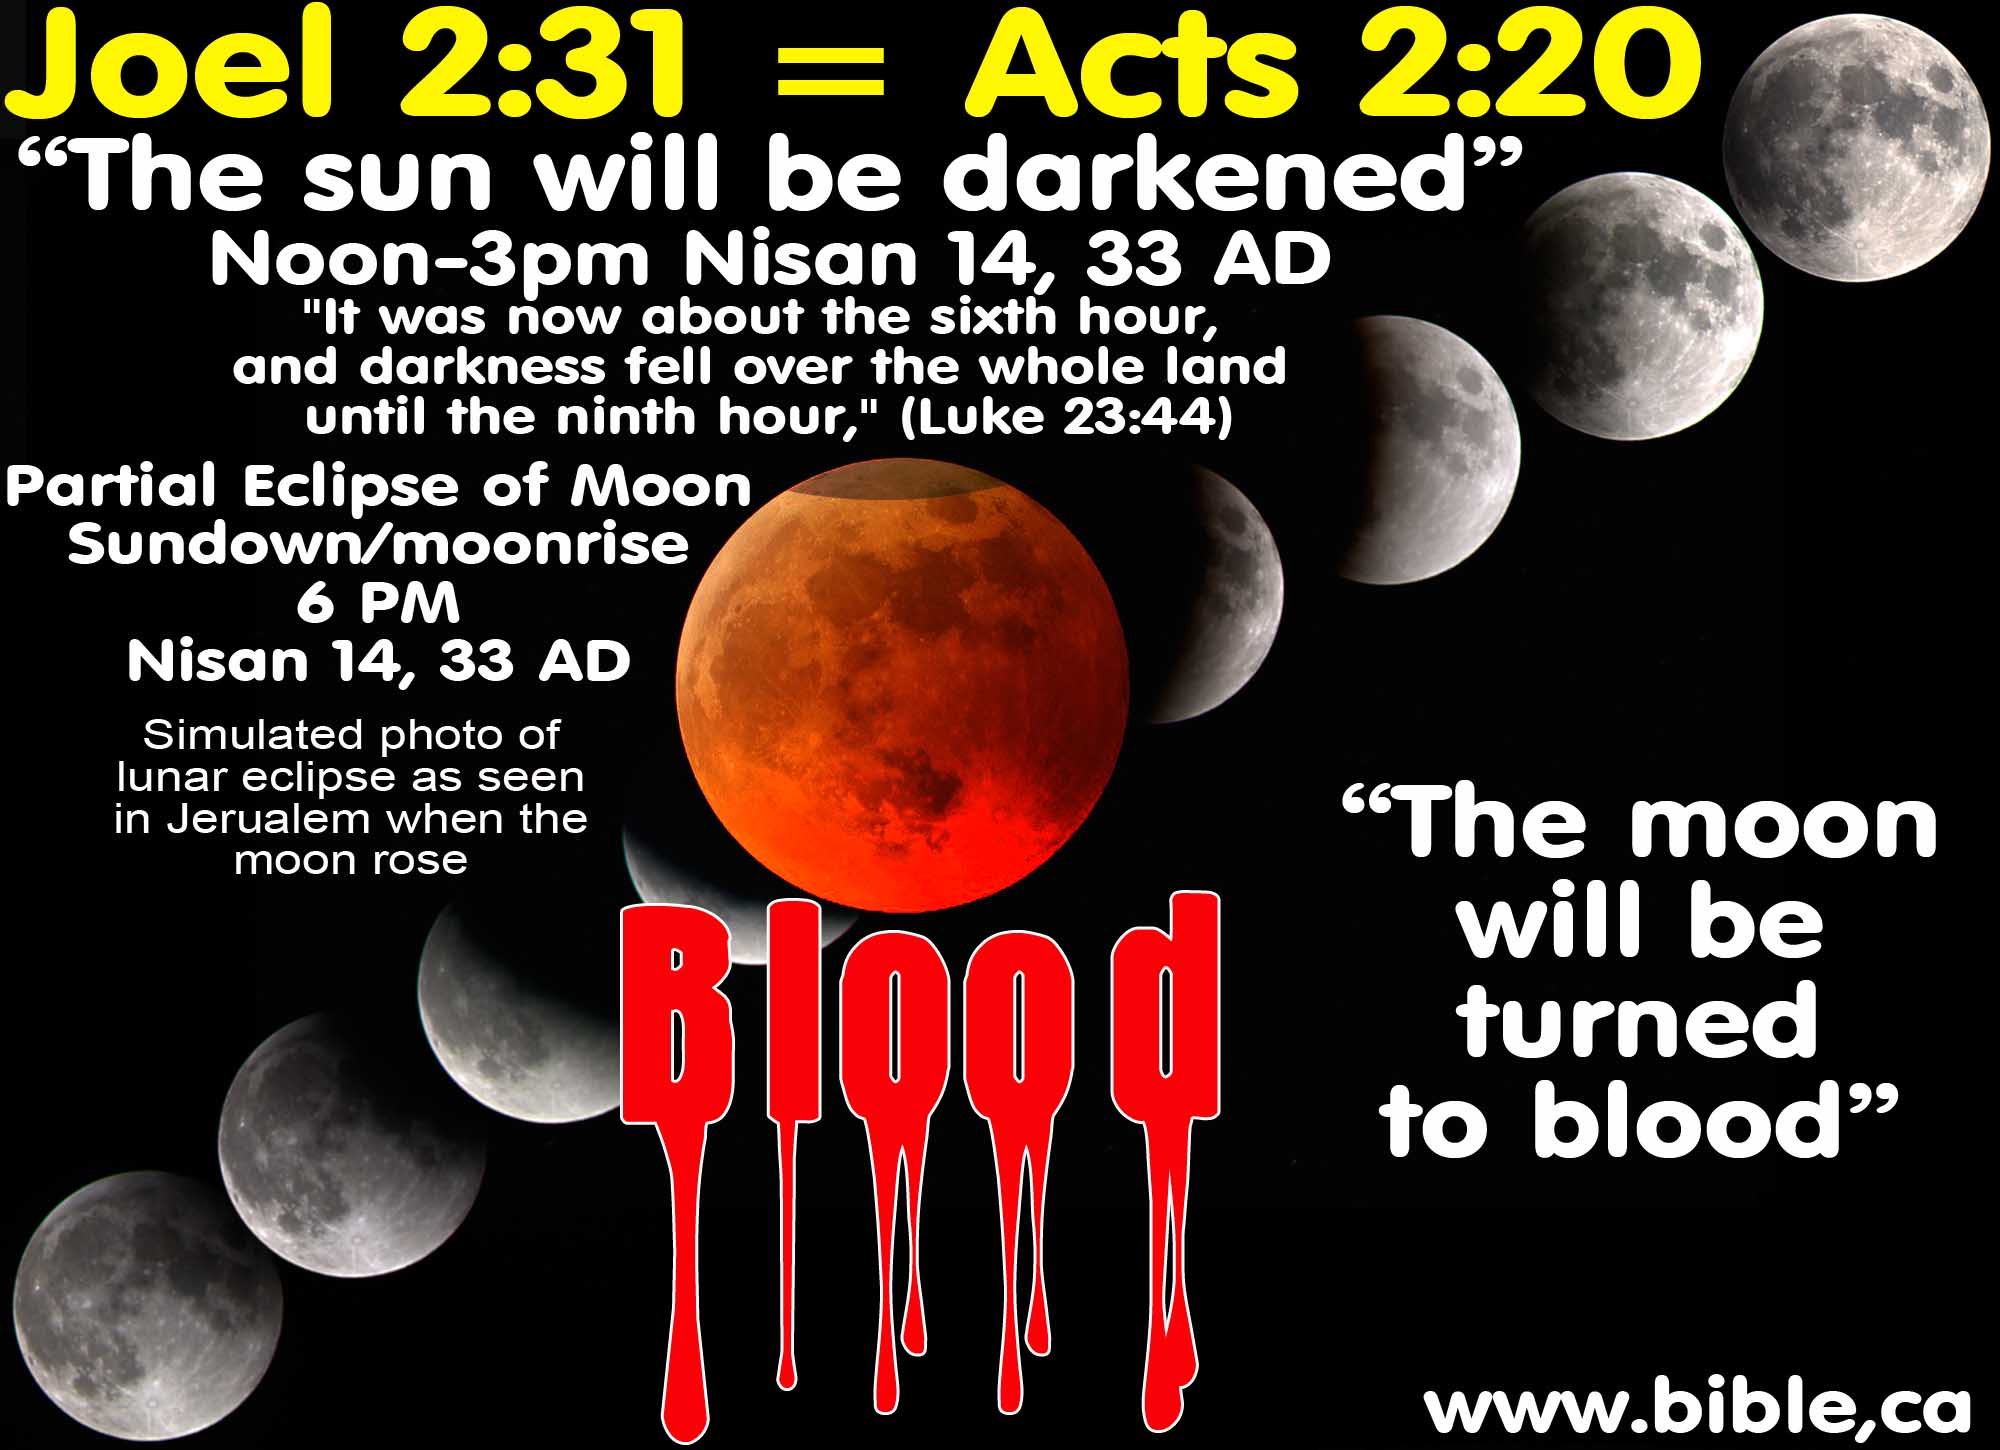 Lunar Eclipses birth and death of 1 BC and 3 April AD 33